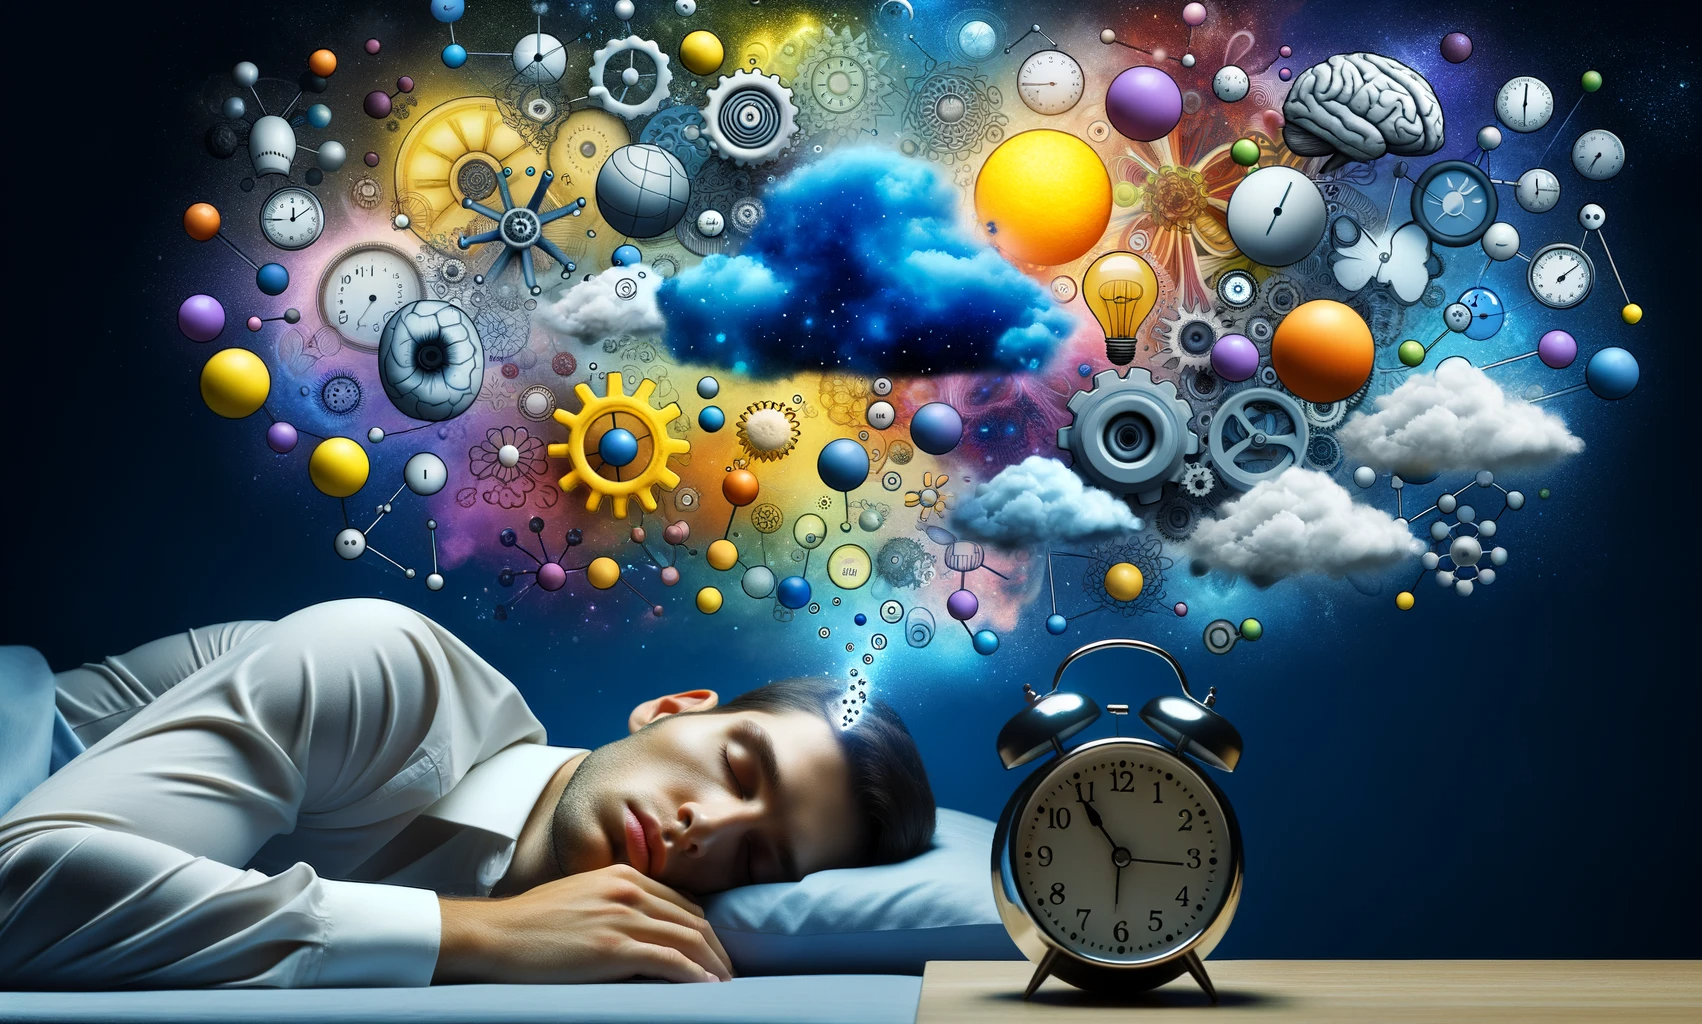 Study: Is snoozing losing? Why intermittent morning alarms are used and how they affect sleep, cognition, cortisol, and mood. Image Credit: Generated with DALL.E 3